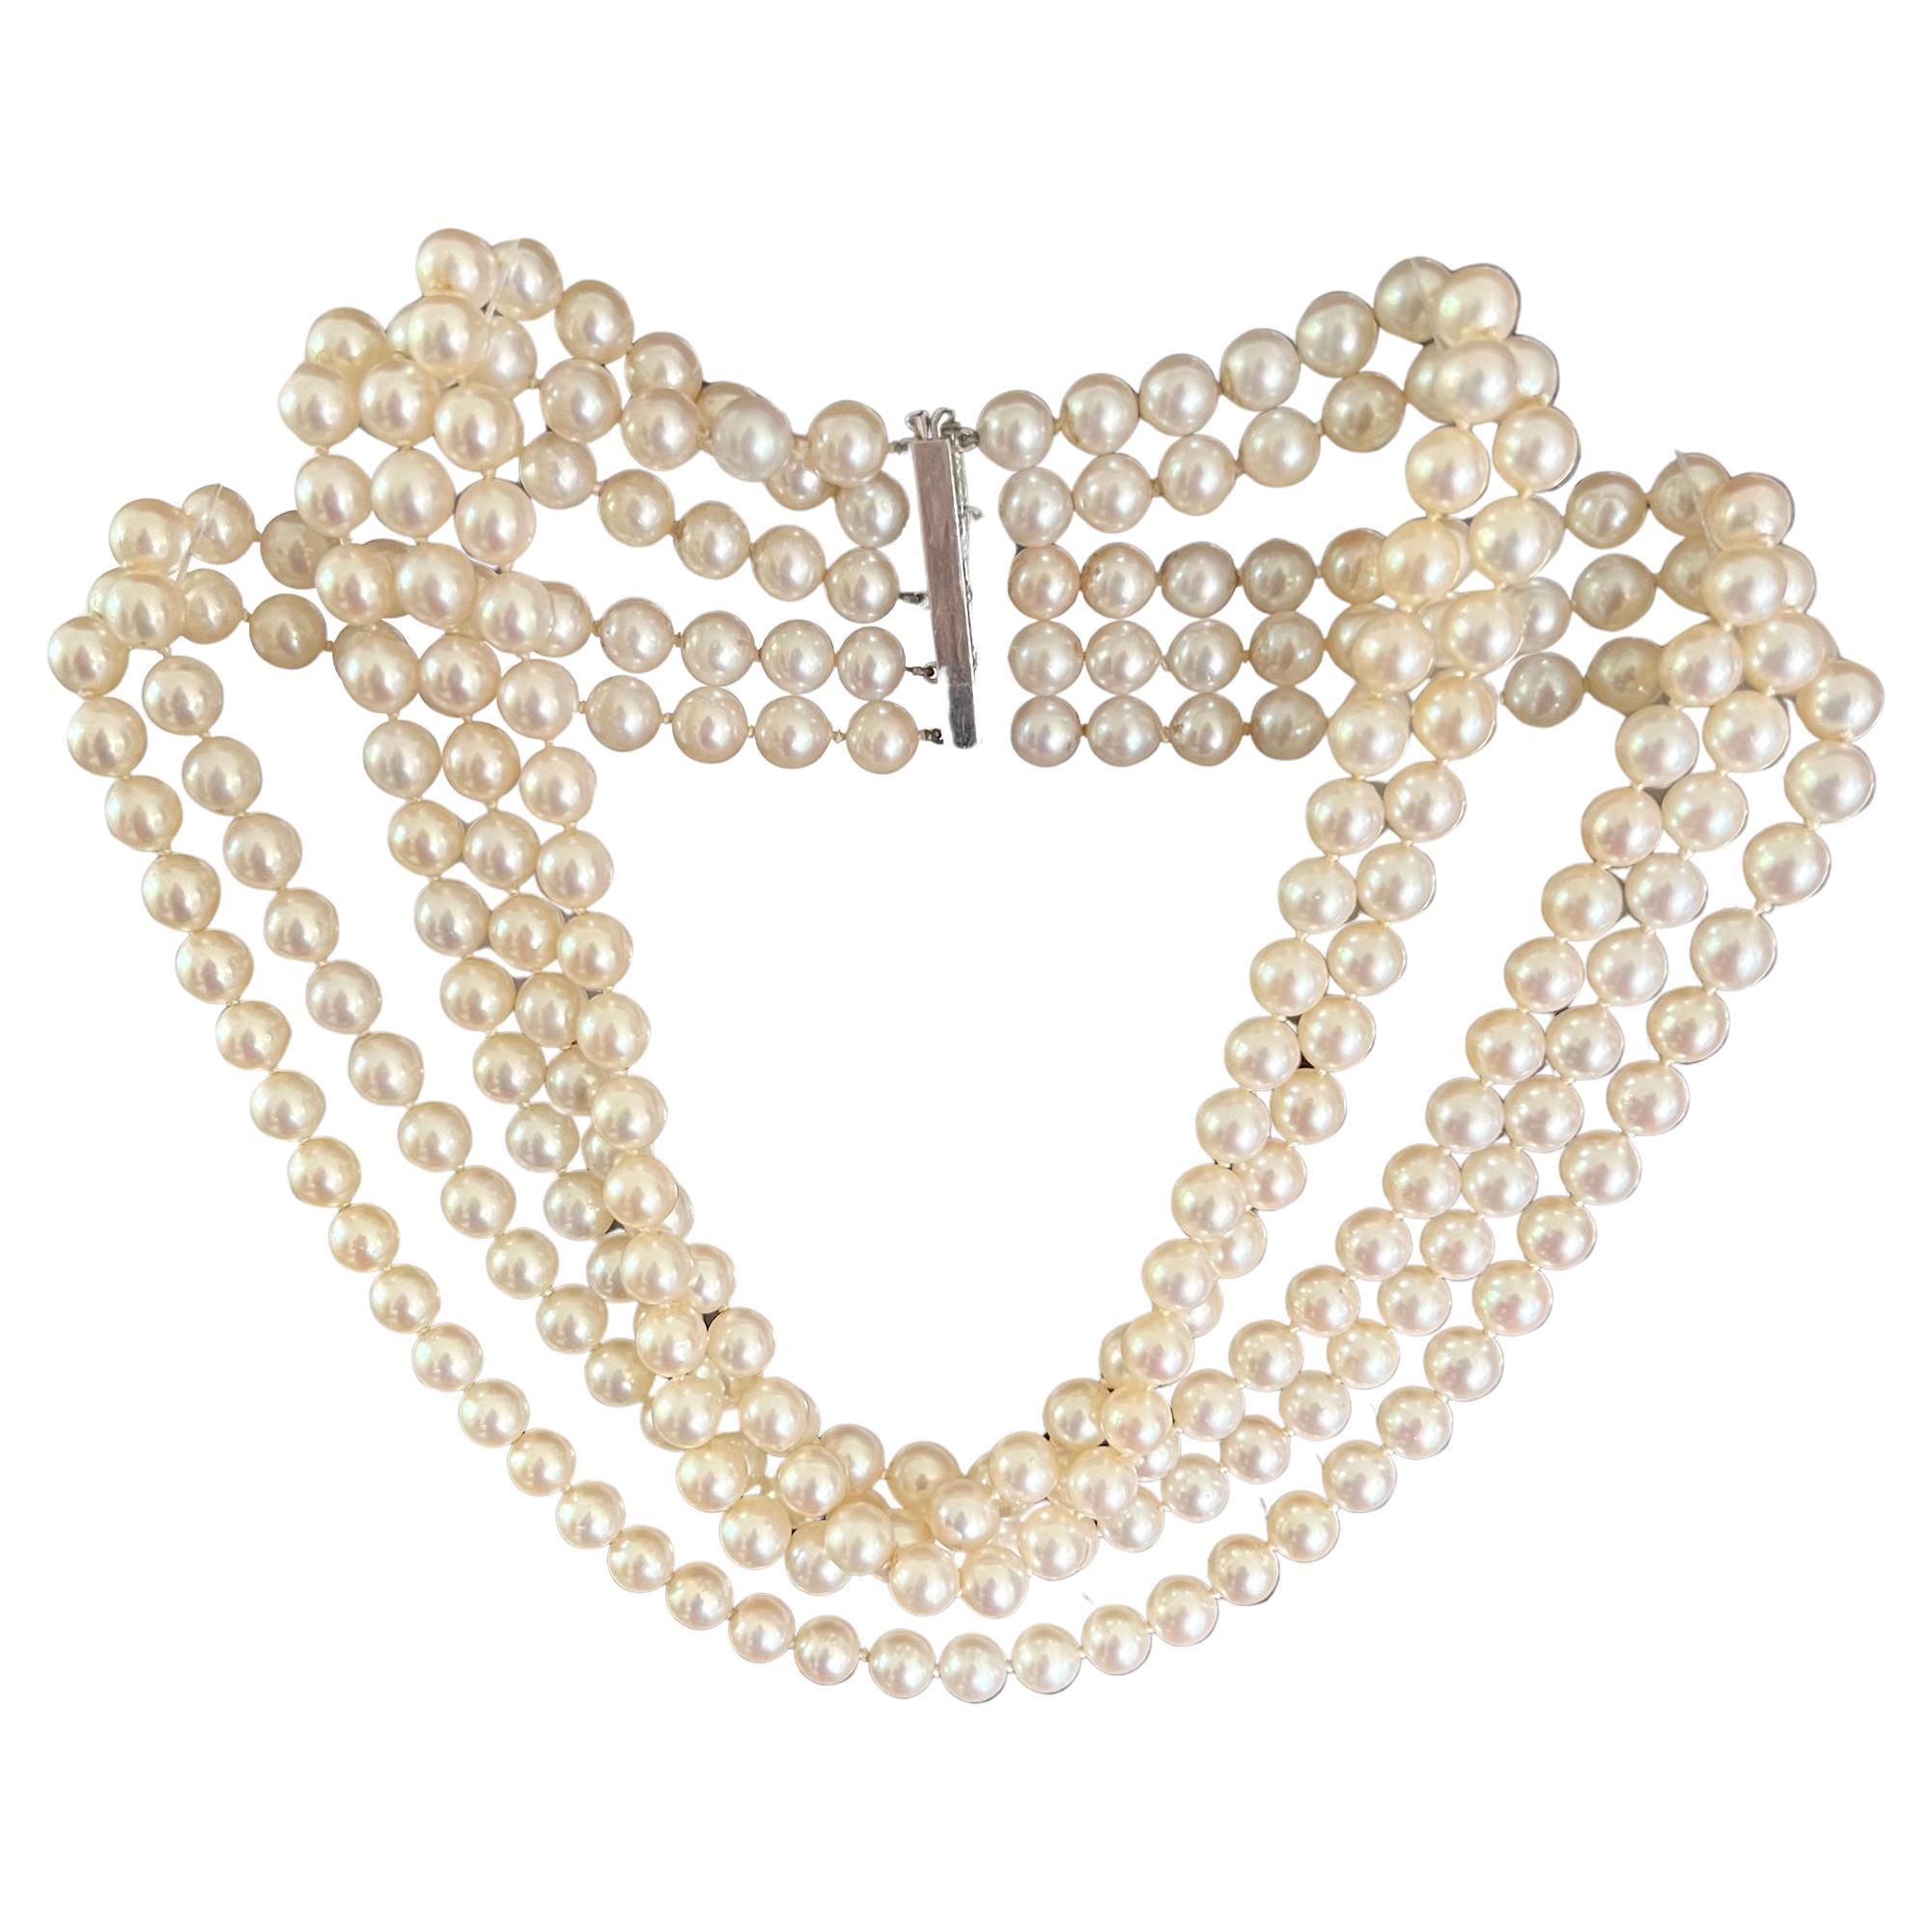 Vintage 1960s 14K White Gold Diamond Emerald Pearl Five Strand Choker Necklace For Sale